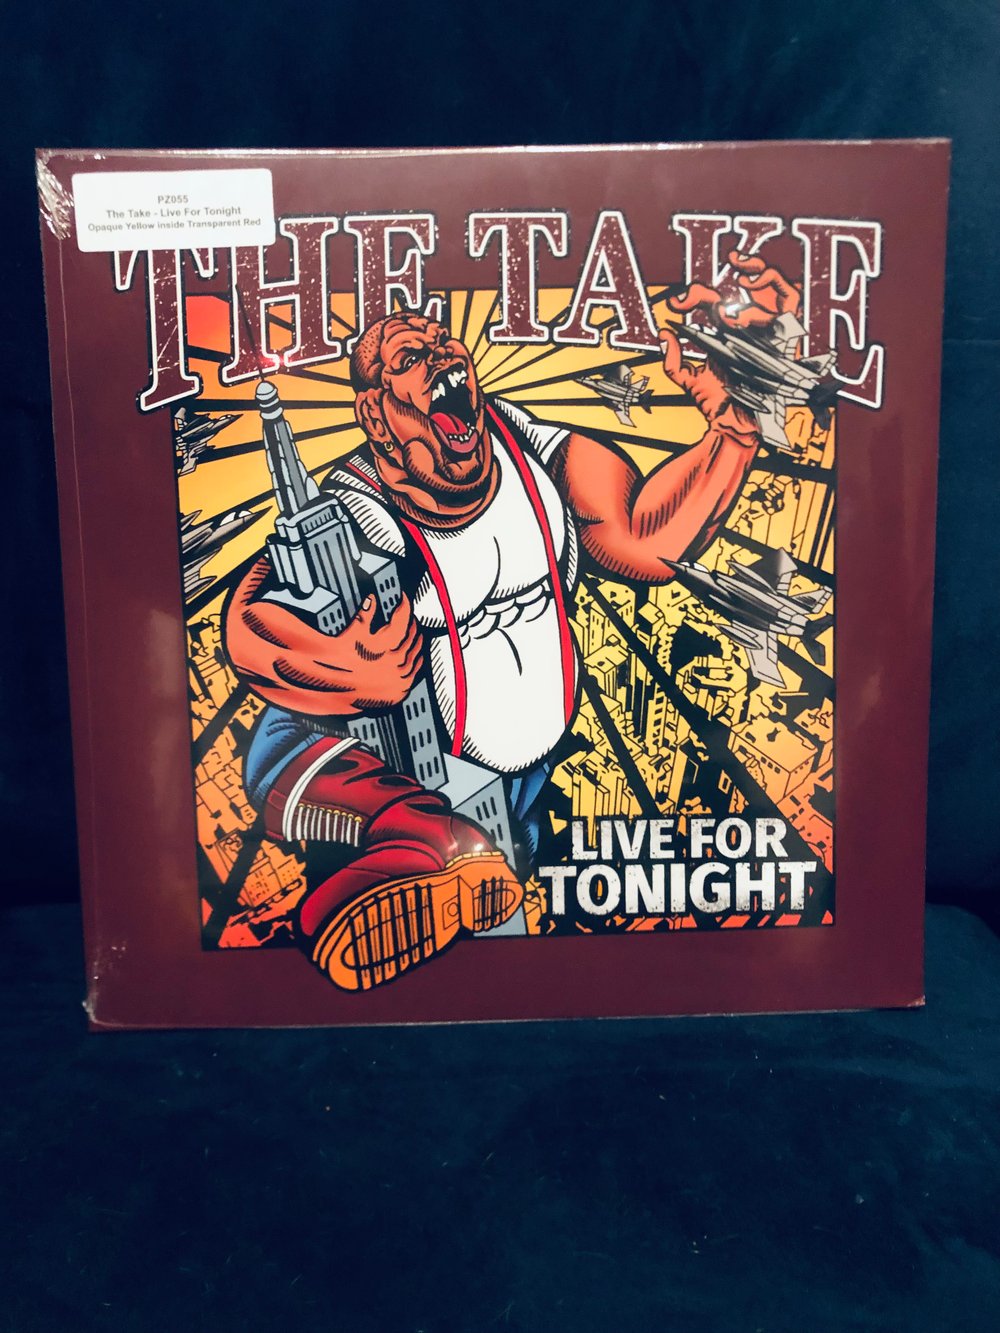 The Take - Live For Tonight 12" EP (LAST COPY!!)